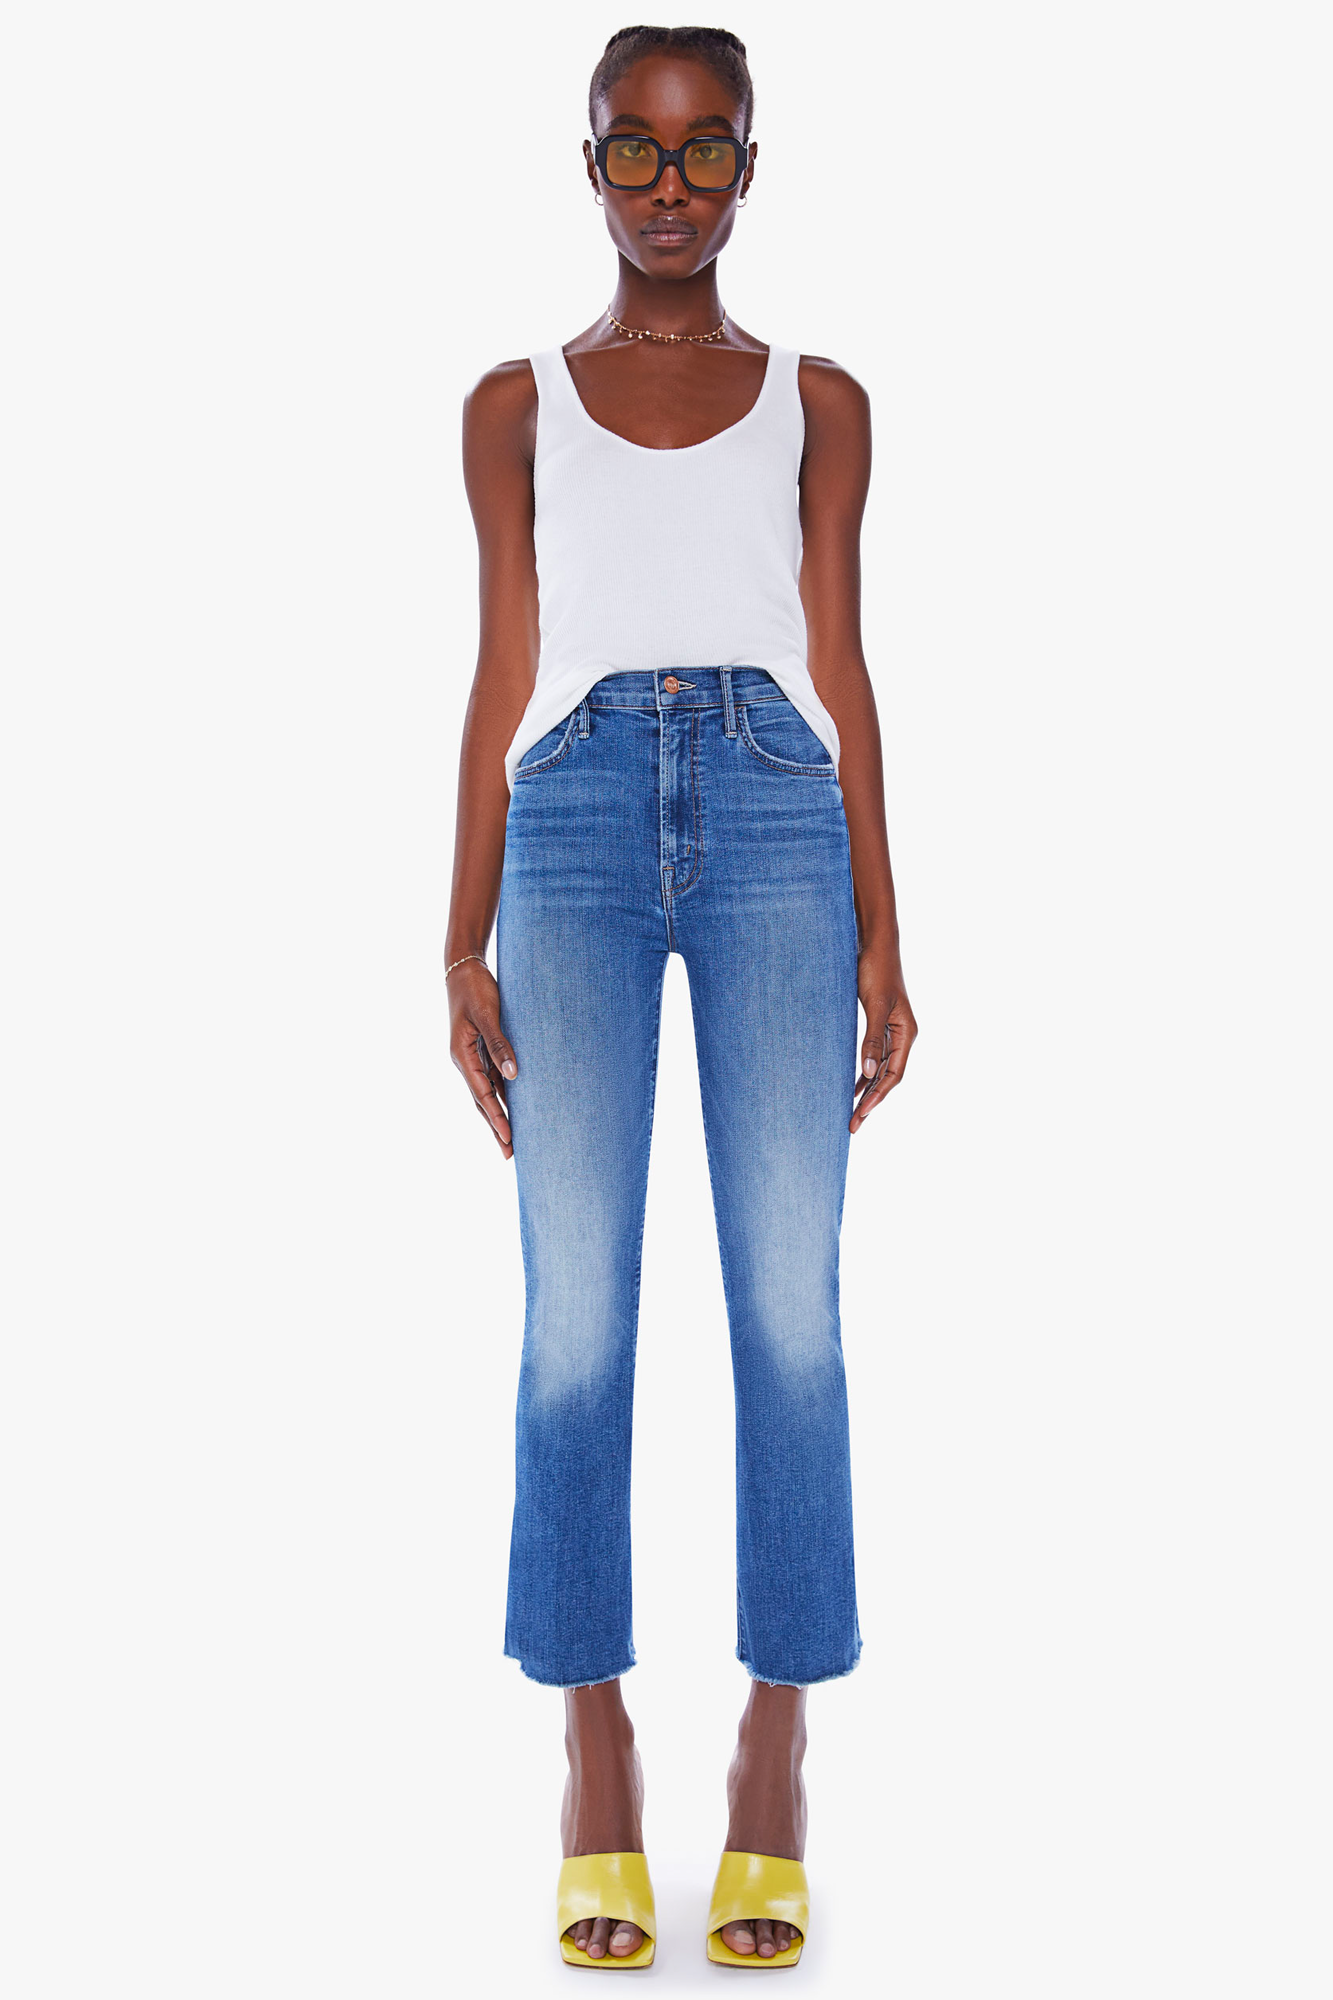 The bestselling Hustler Ankle Fray from Mother is designed for a flattering high-rise fit, featuring an ankle-length inseam and a raw hem. This stretch denim style is available in a mid-blue wash with fading throughout for maximum versatility. Pick your potion for a modern look and all-day comfort.